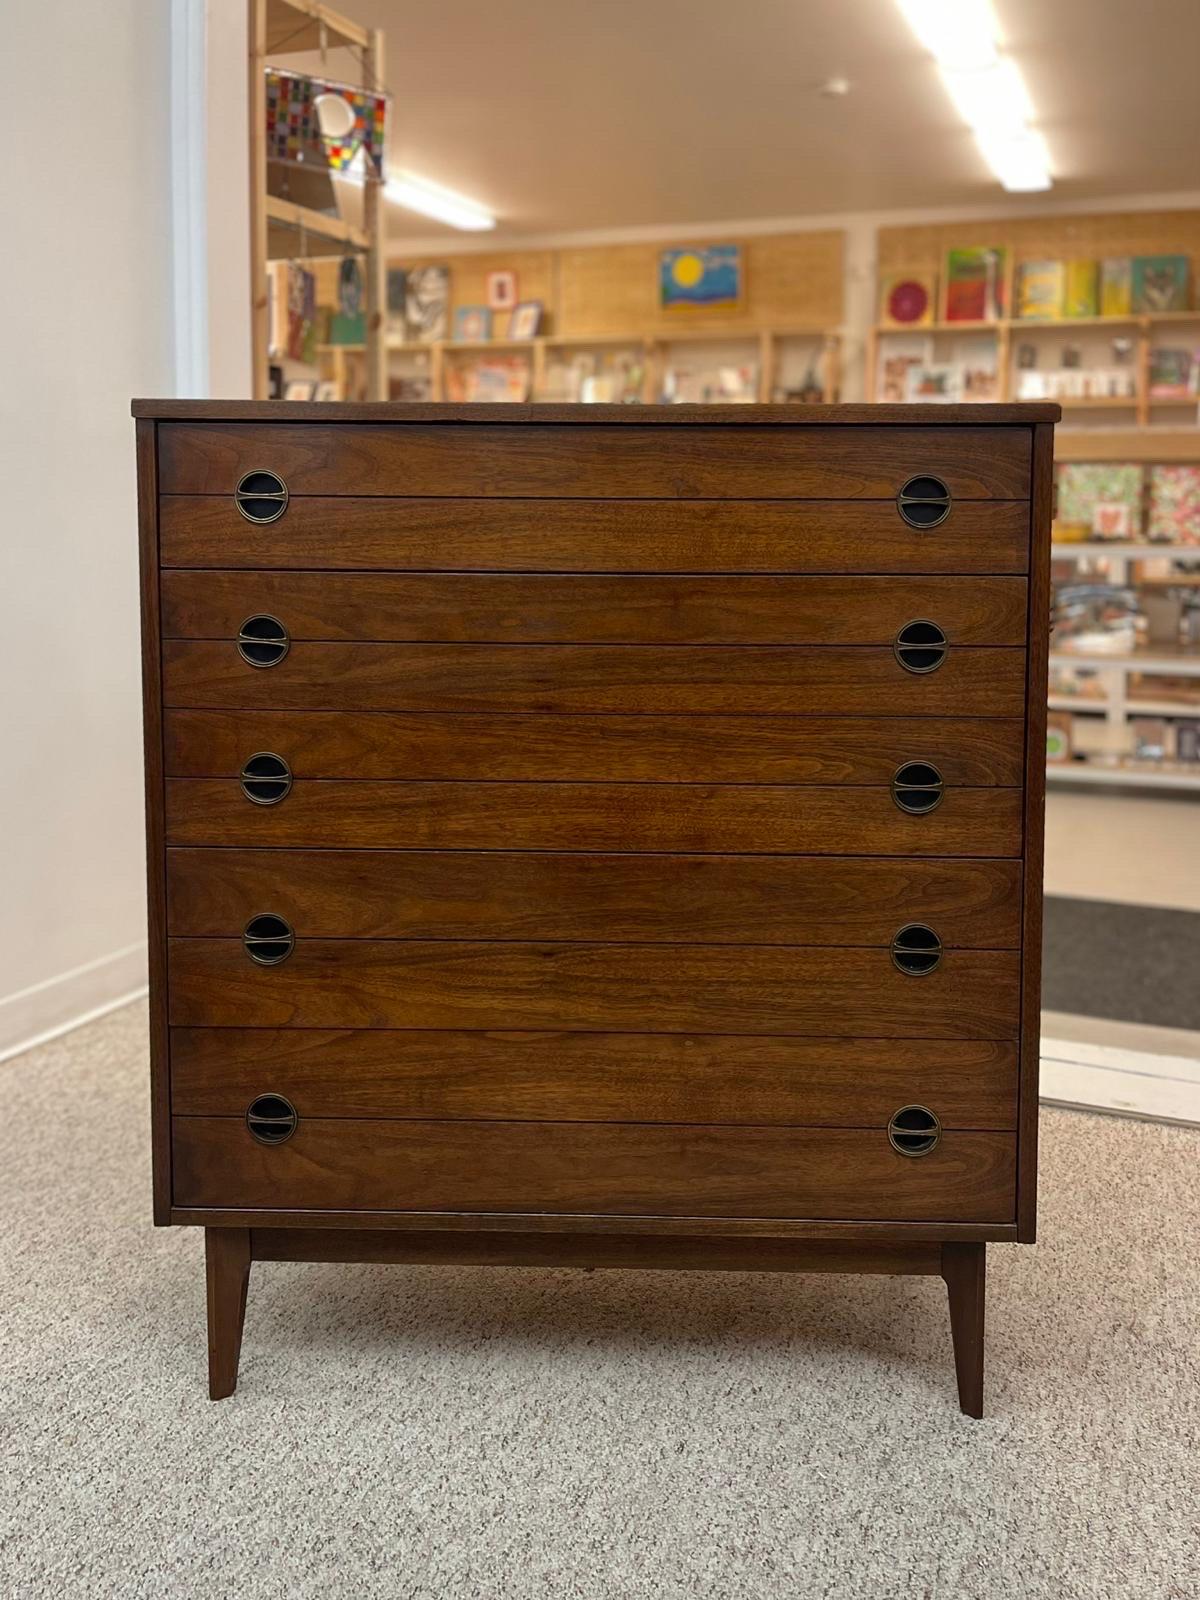 Mid Century Tall Dresser with Four Dovetailed Drawers.The Middle Drawer is Deeper than the Rest as Shown. Tapered Legs, original Round Handles. Vintage Condition Consistent with Age as Pictured.

Dimensions. 37 1/2 W ; 18 D ; 43 H